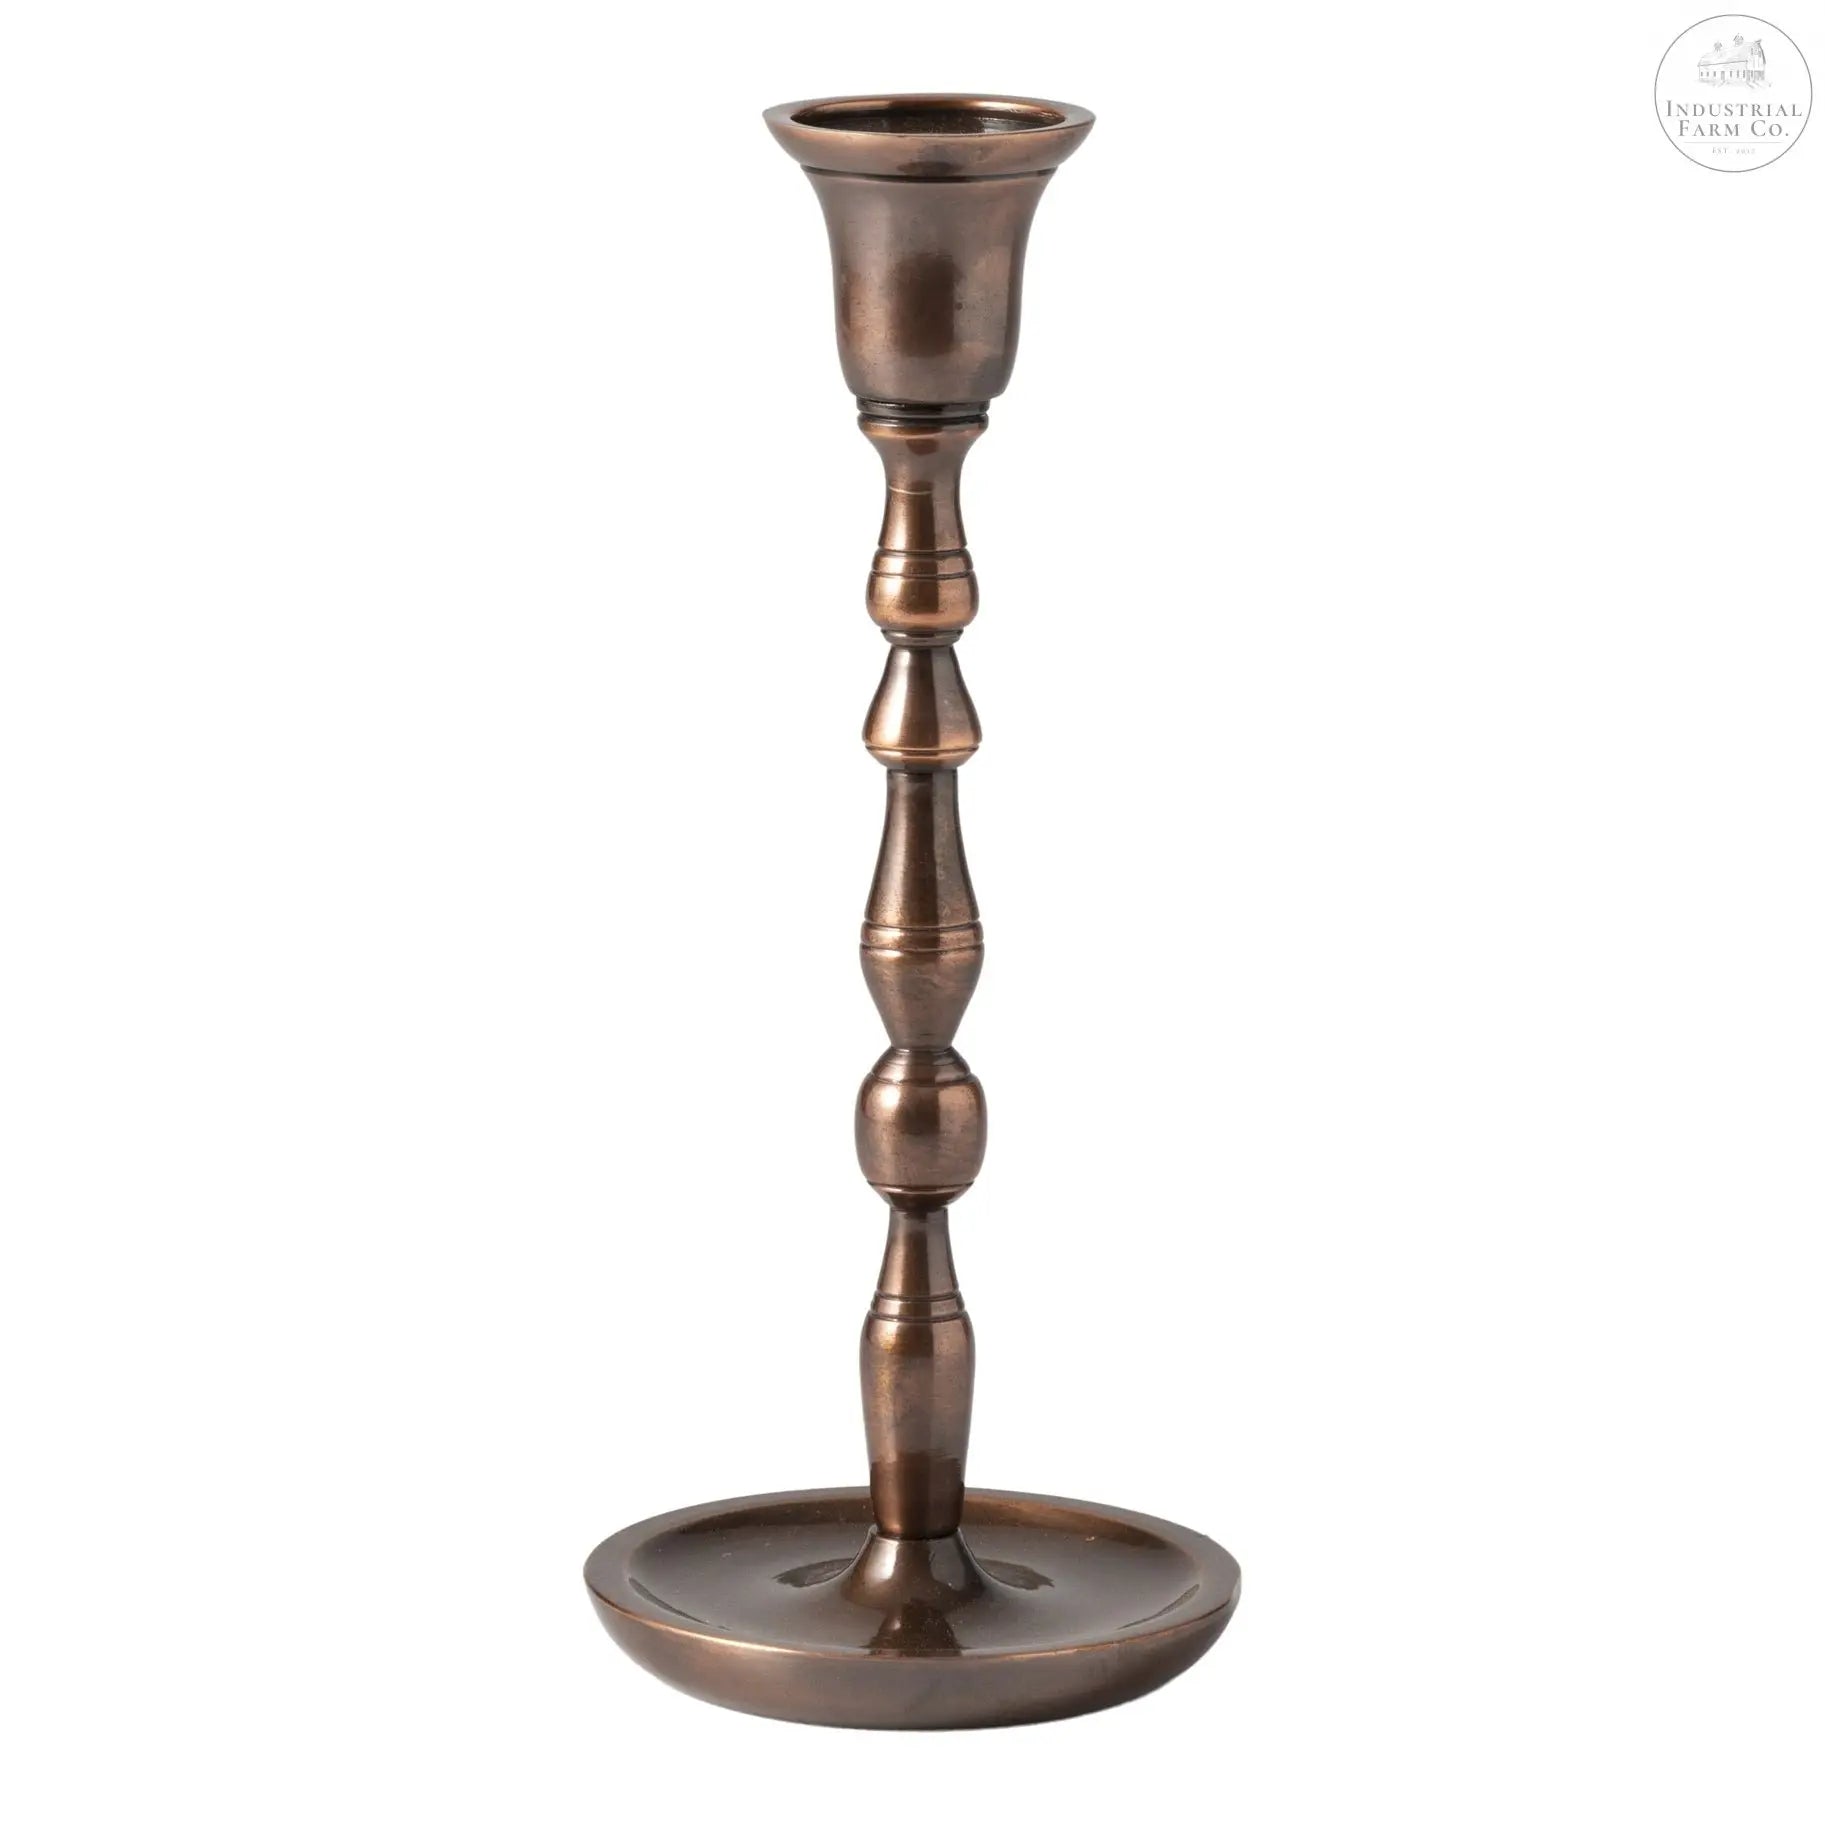 Tapered Copper Candle Sticks  Small   | Industrial Farm Co